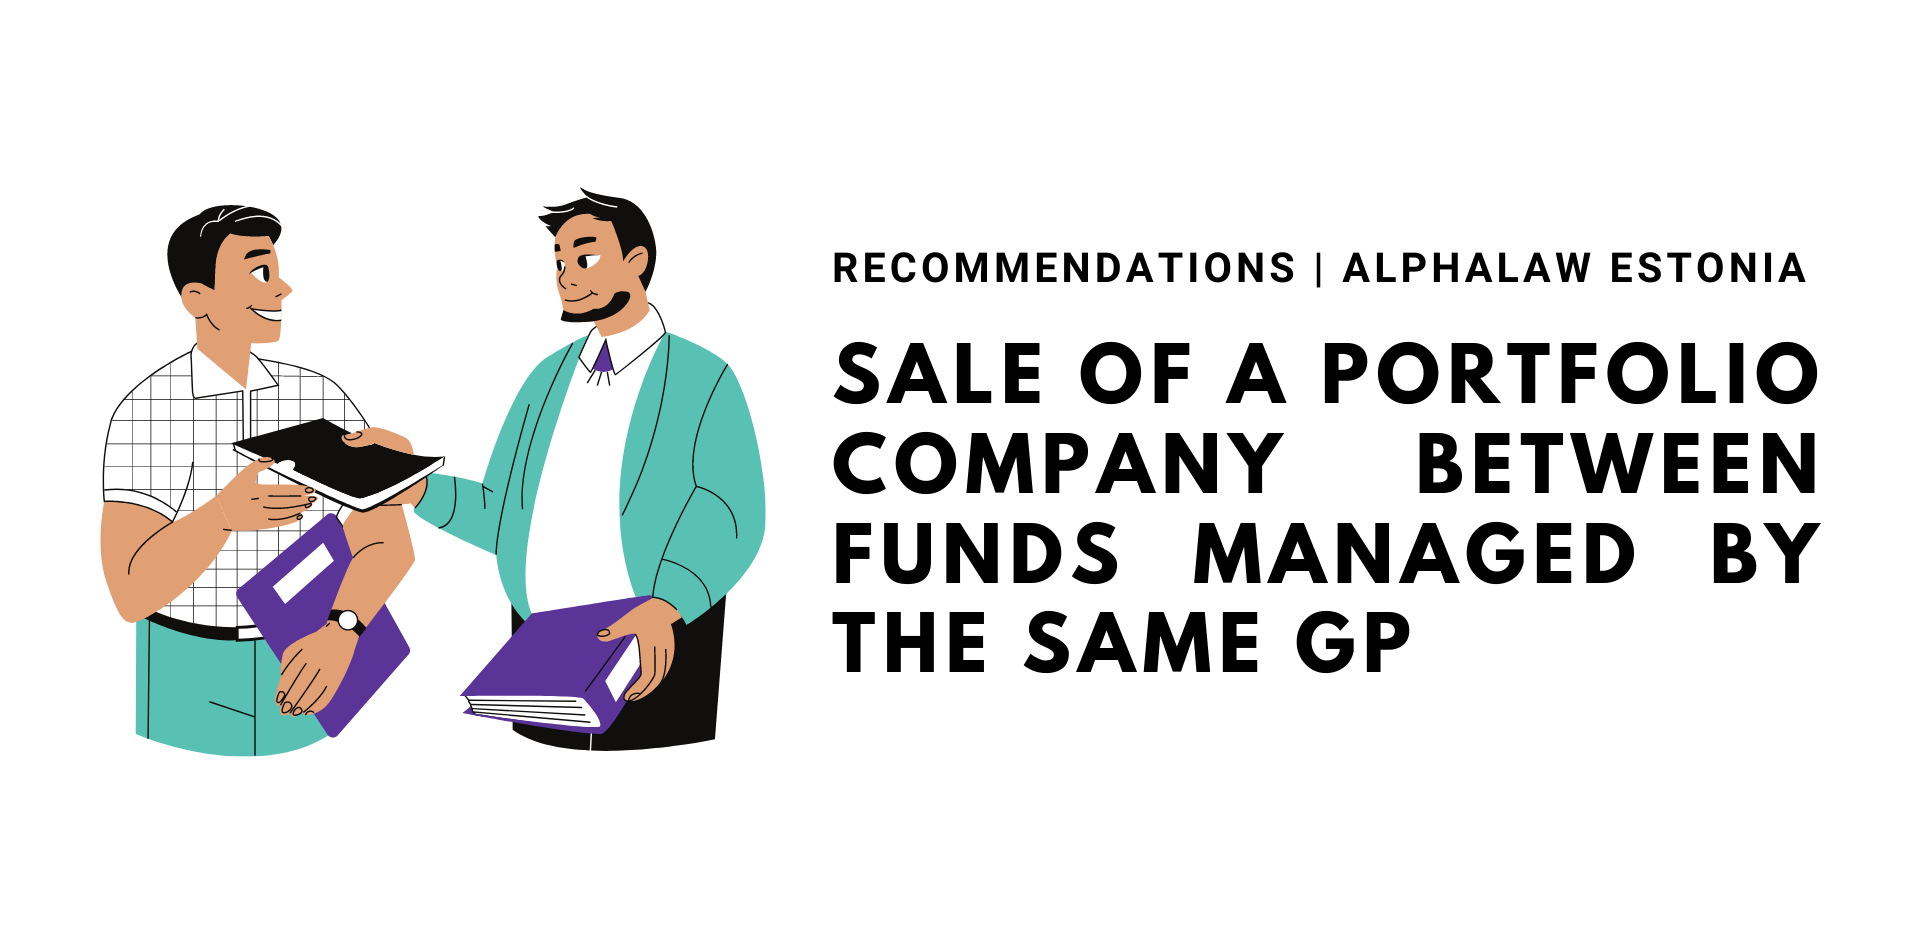 Sale of a Portfolio Company Between Funds Managed by the Same GP